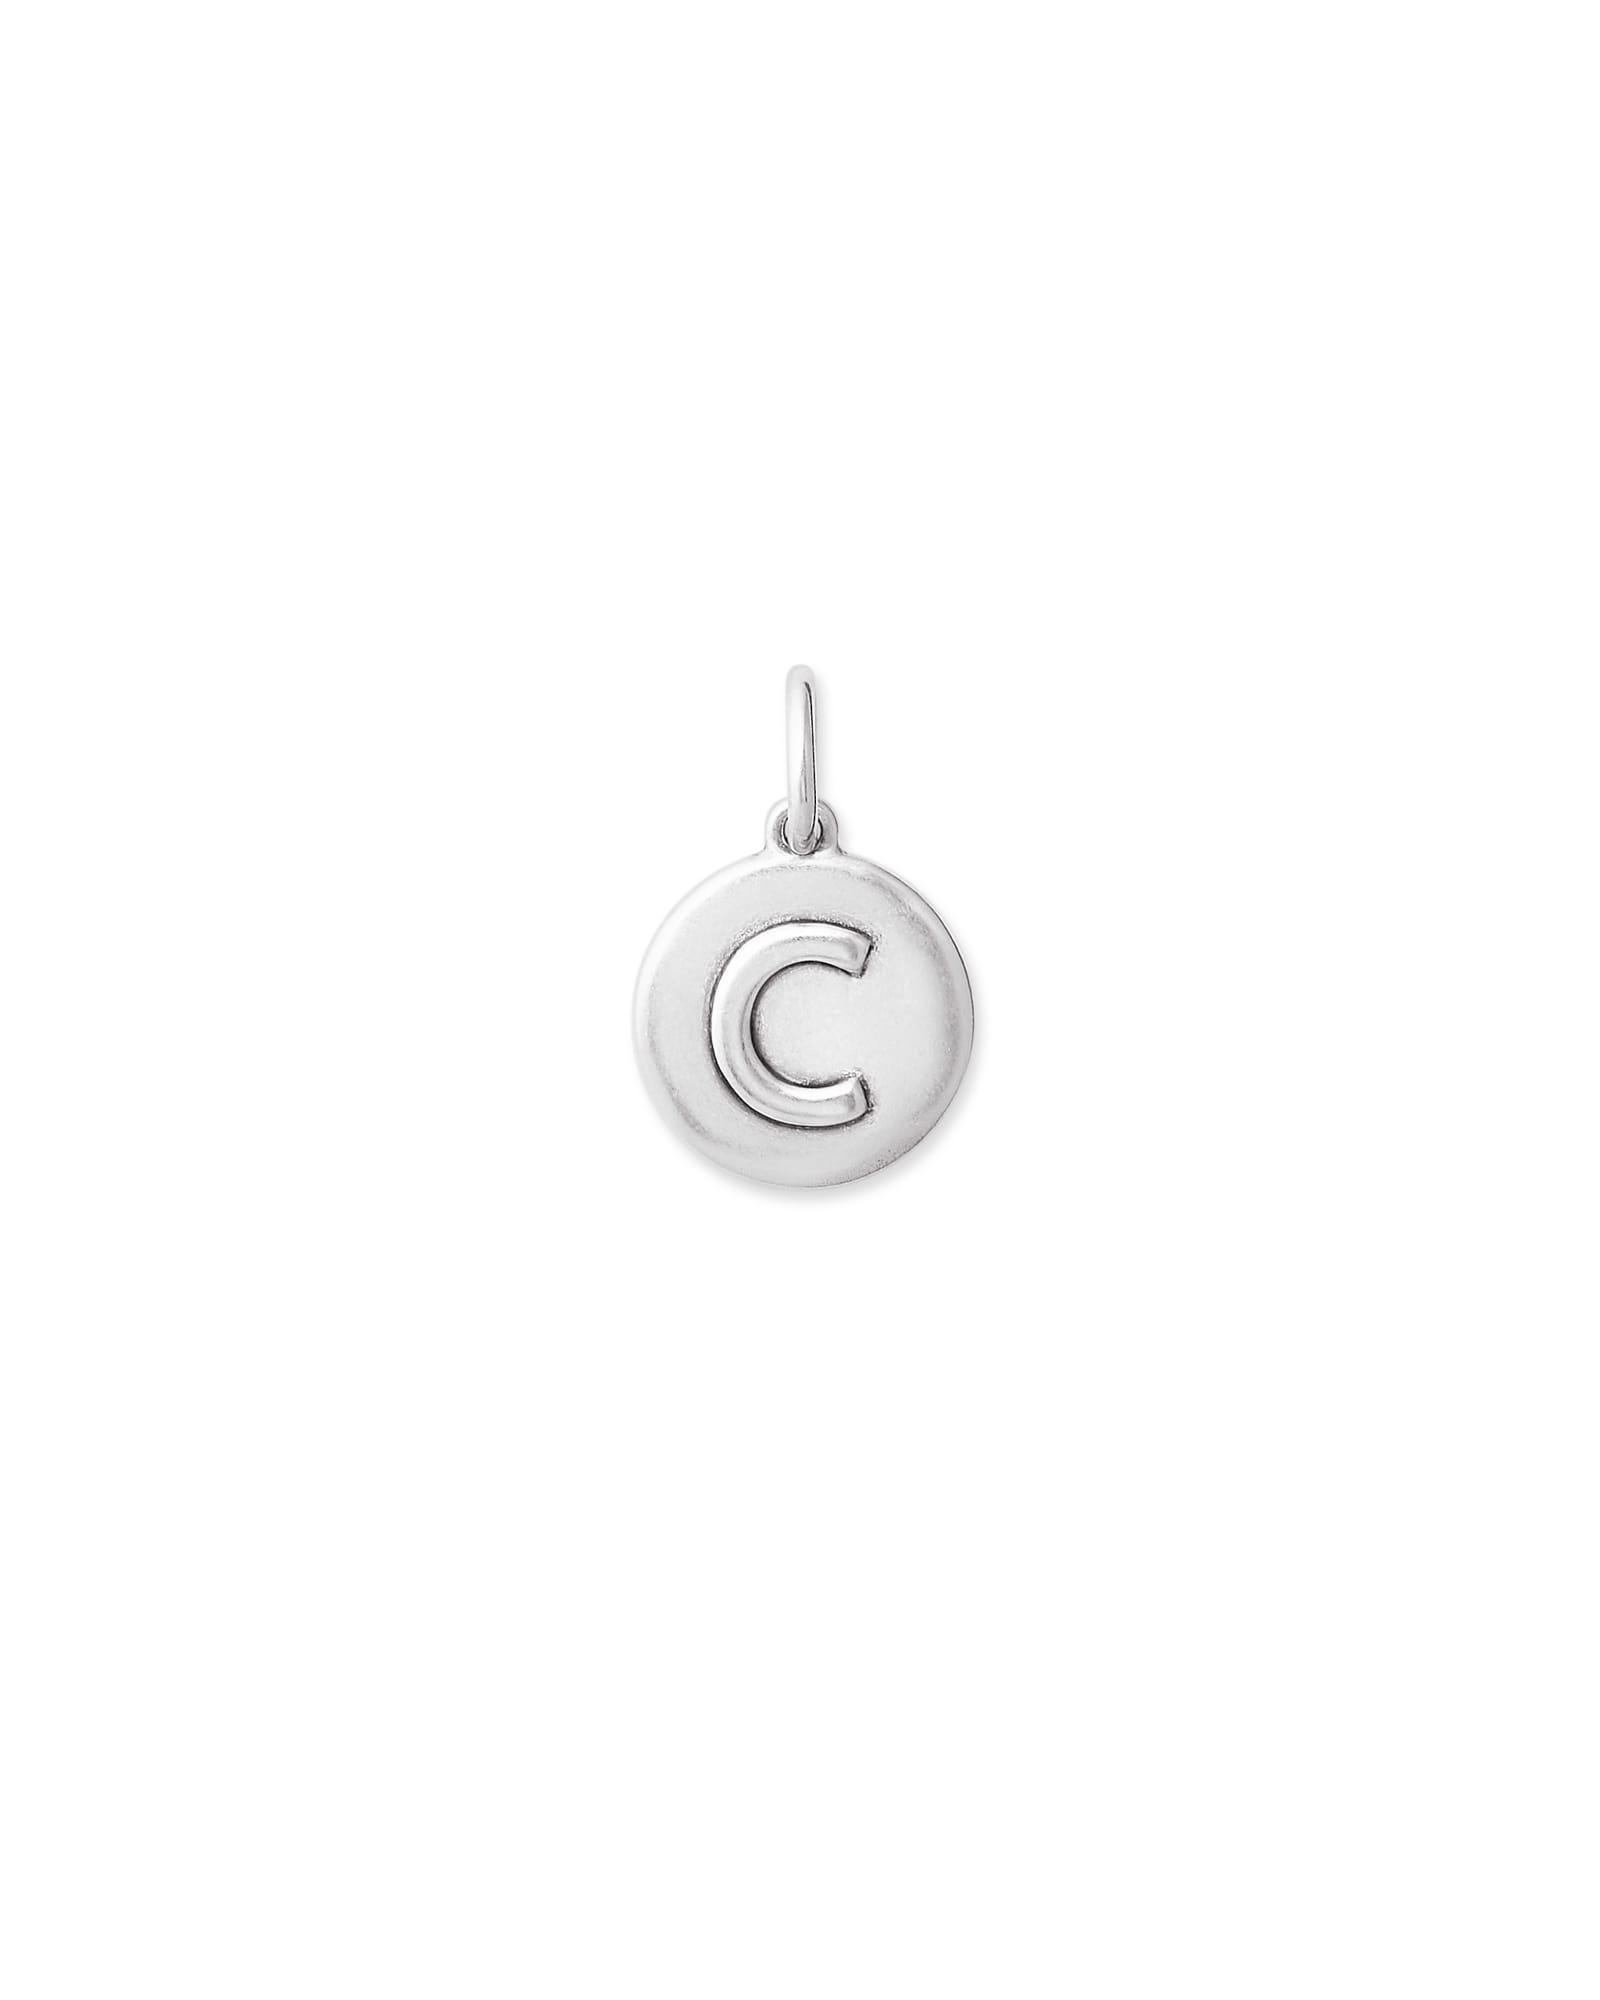 Kendra Scott Letter C Coin Charm in Oxidized Sterling Silver   Metal